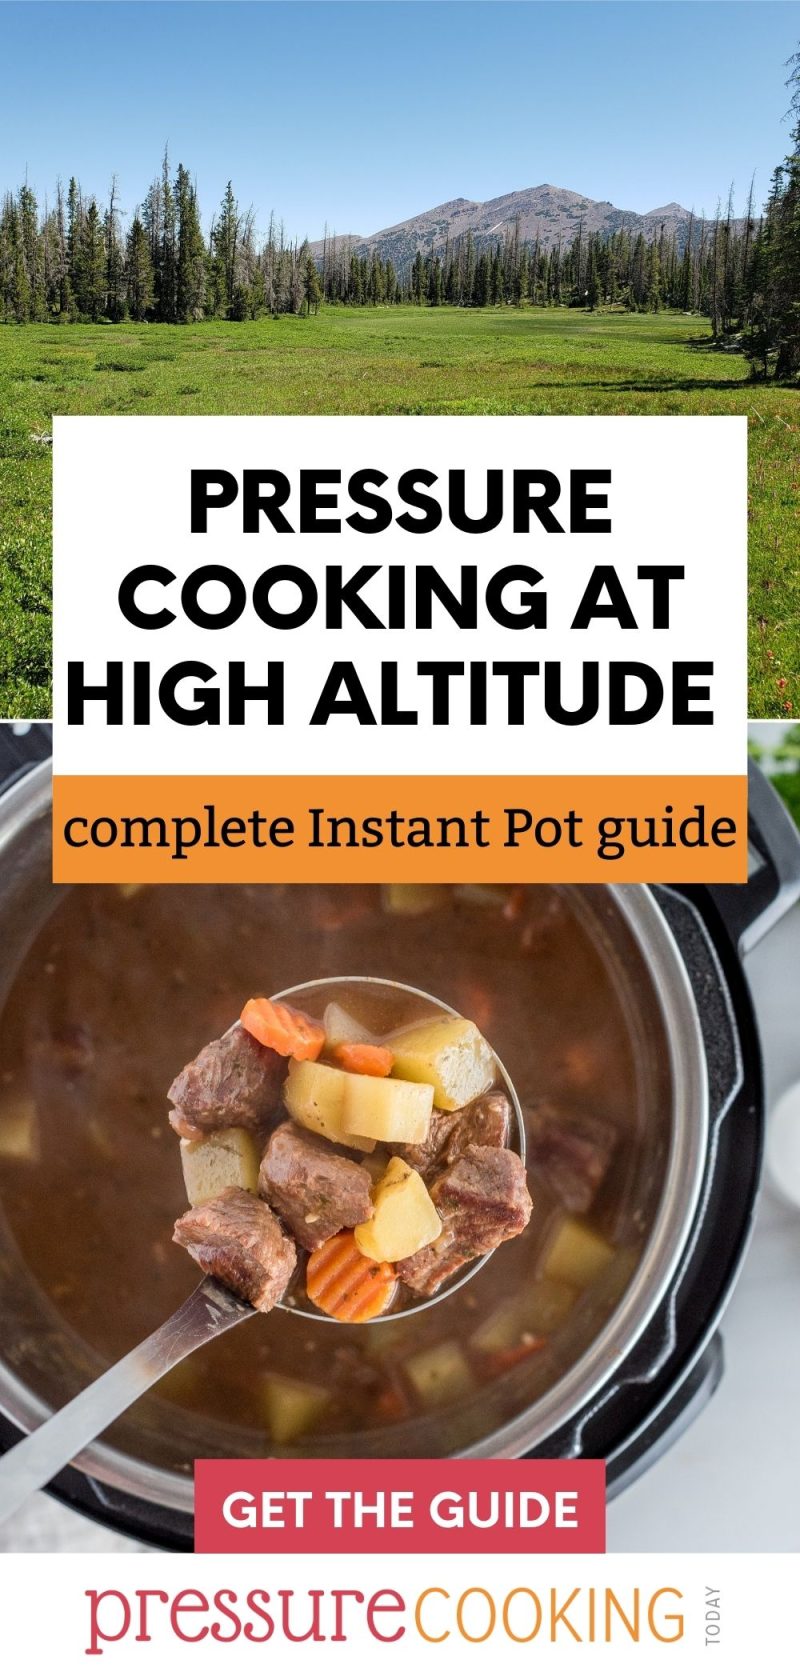 Pinterest button that reads "Pressure Cooking at High Altitude: complete Instant Pot Guide" over two photos: one of a mountain with pine trees and a meadow, and the lower photo of a ladle of stew held over an Instant Pot.